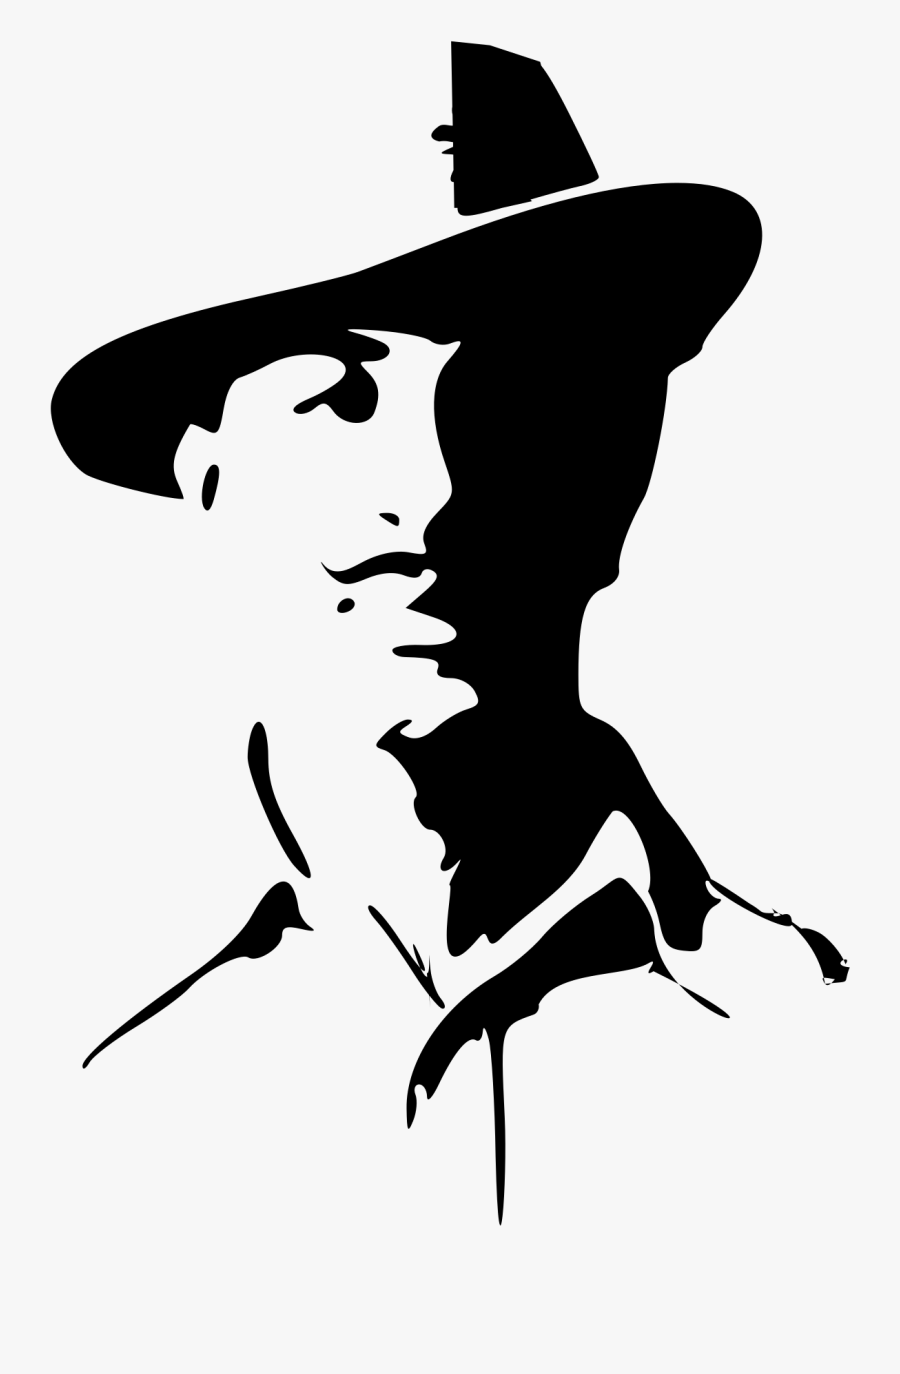 Freedom Clip Art Download - Bhagat Singh Wall Painting, Transparent Clipart